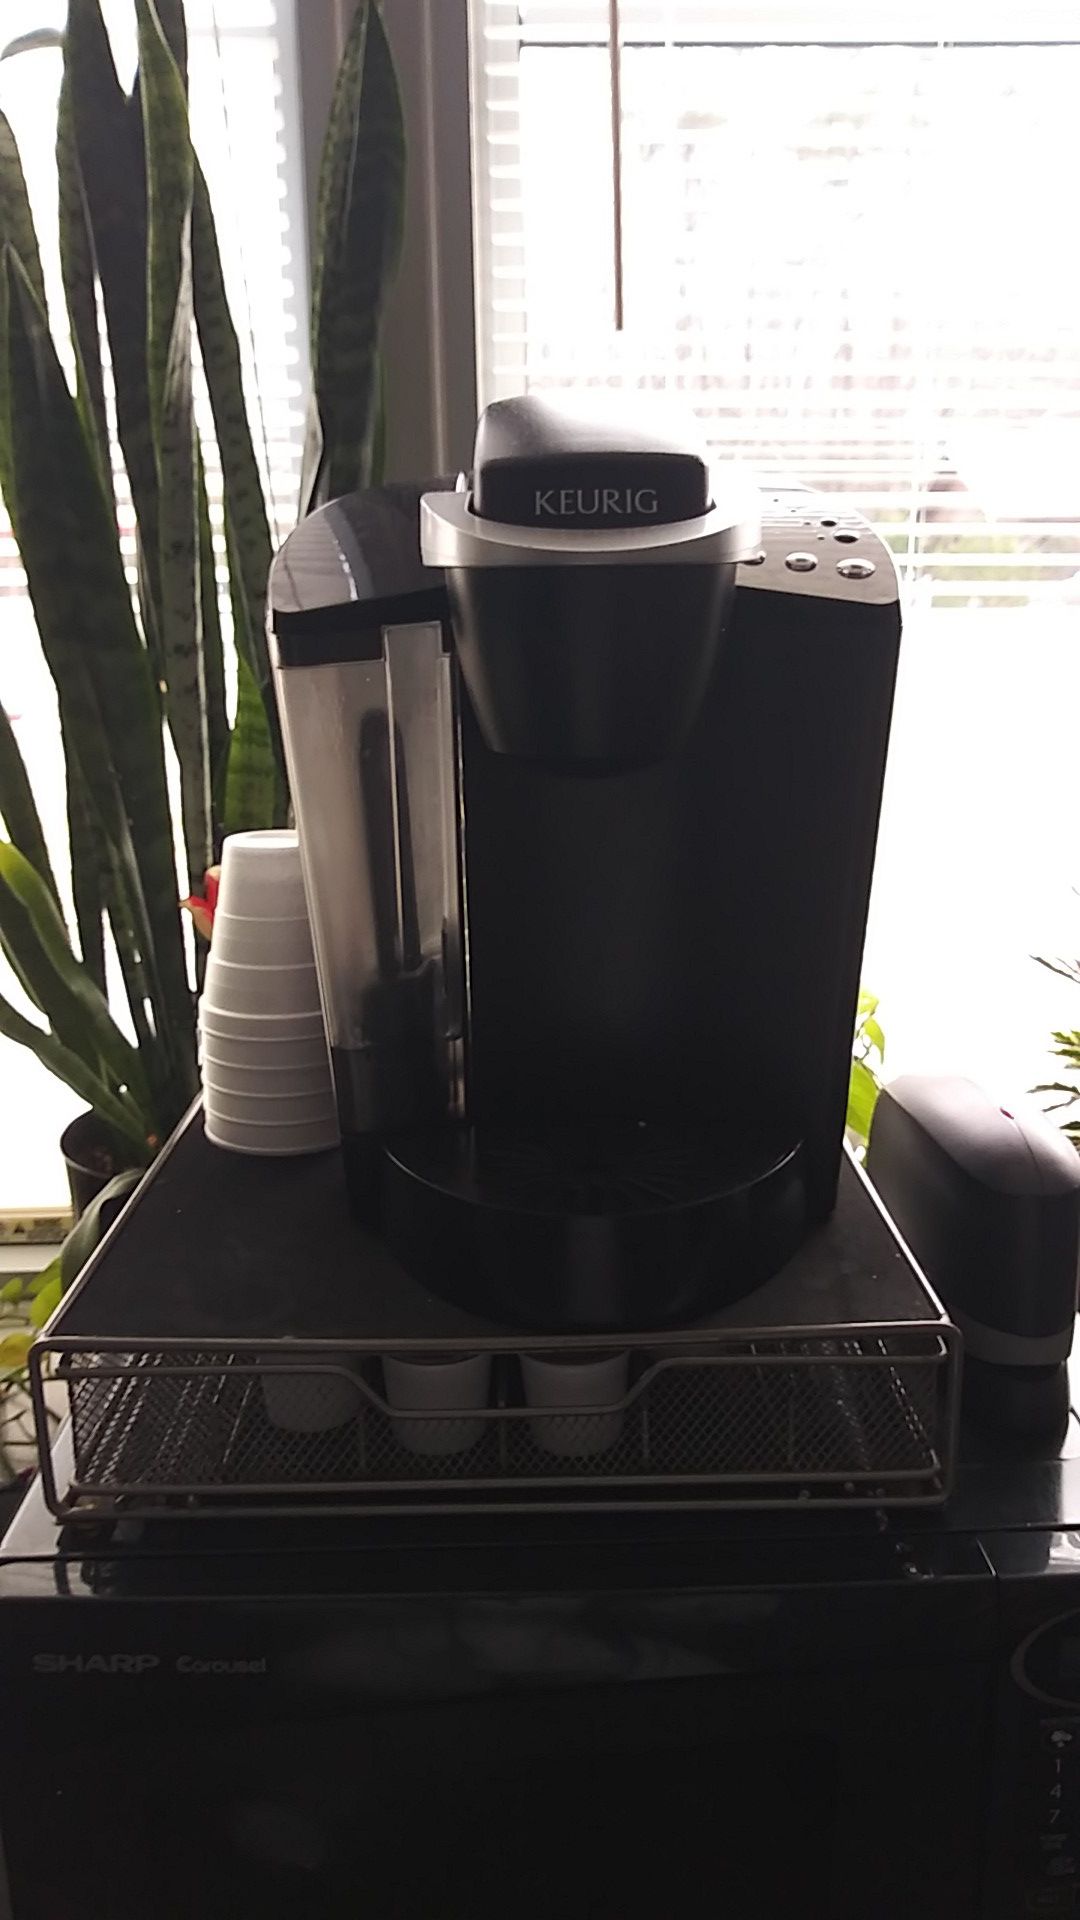 Keuric Coffee Maker with Tray